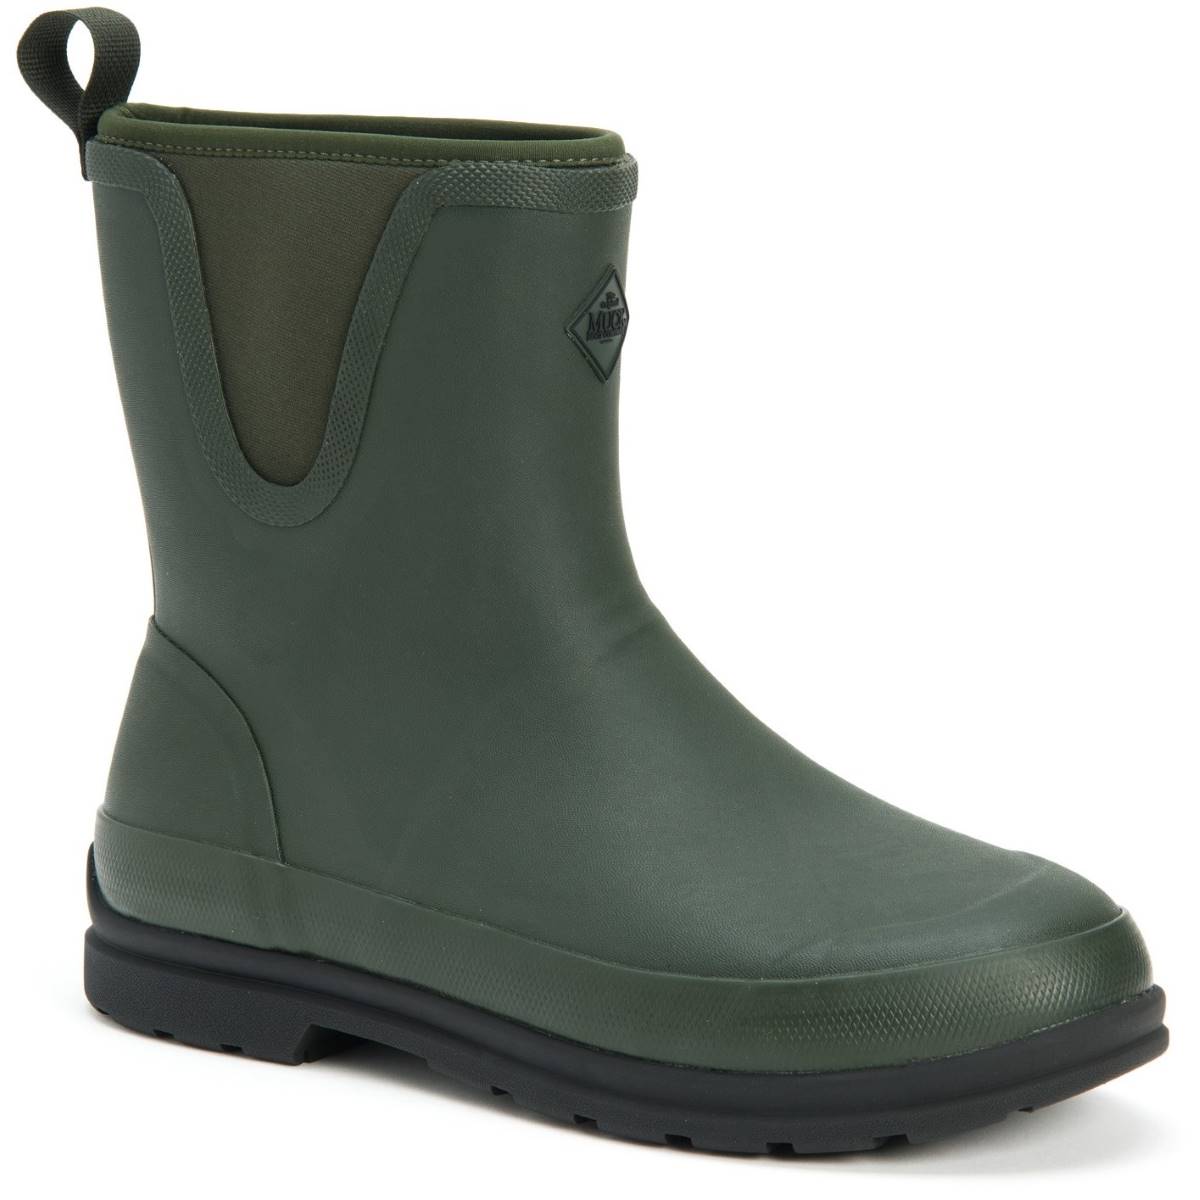 Muck Boots Originals Pull On Mid Green Mens boots OMM-300 in a Plain Rubber in Size 10